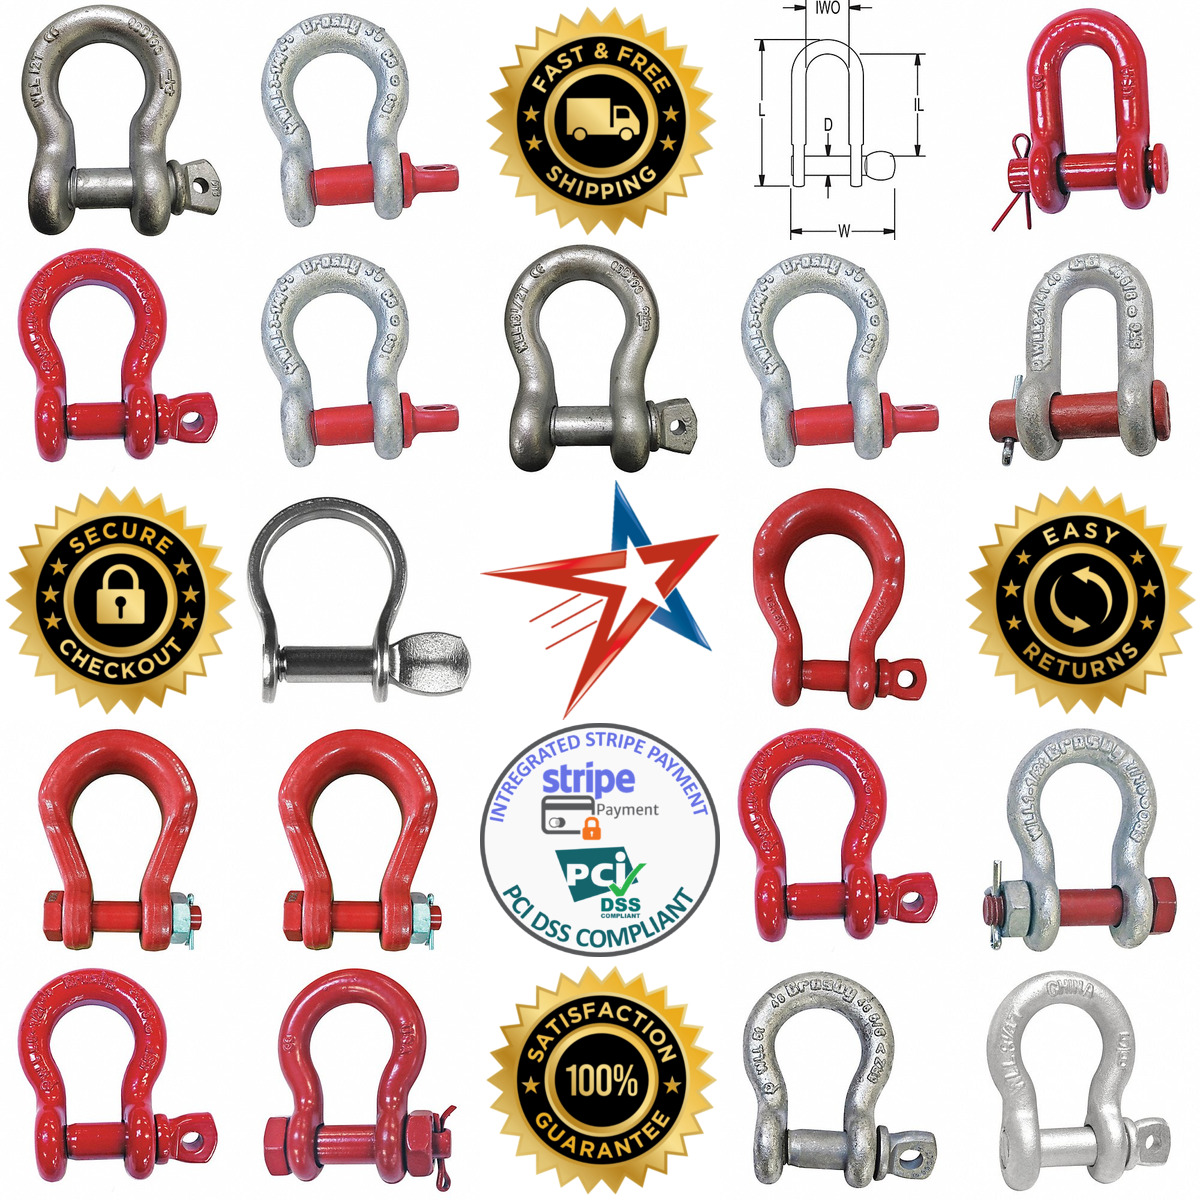 A selection of Metal Shackles products on GoVets